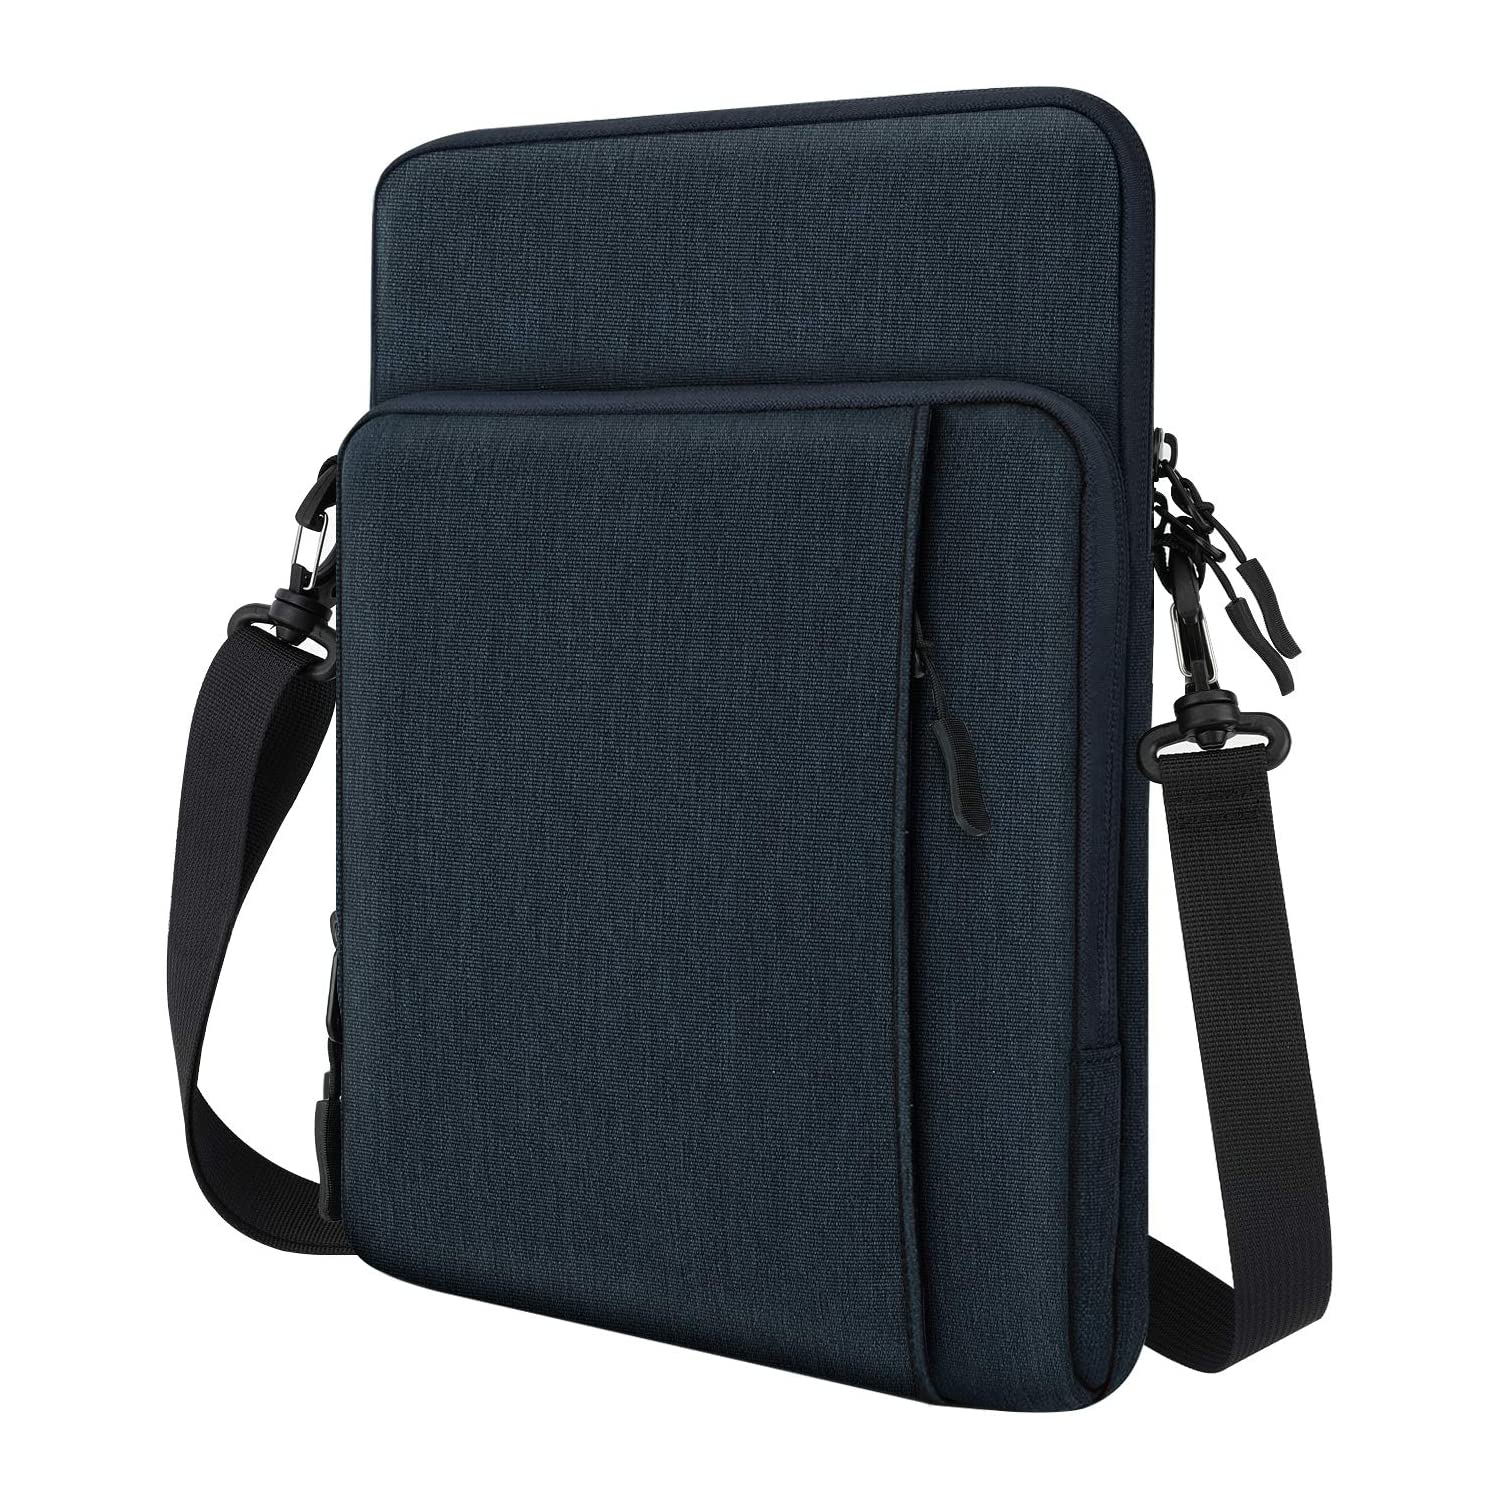 12.9 Inch Tablet Sleeve Shoulder Bag for iPad Pro 12.9 2018-2021, Protective Case for 12.4" Samsung Galaxy Tab